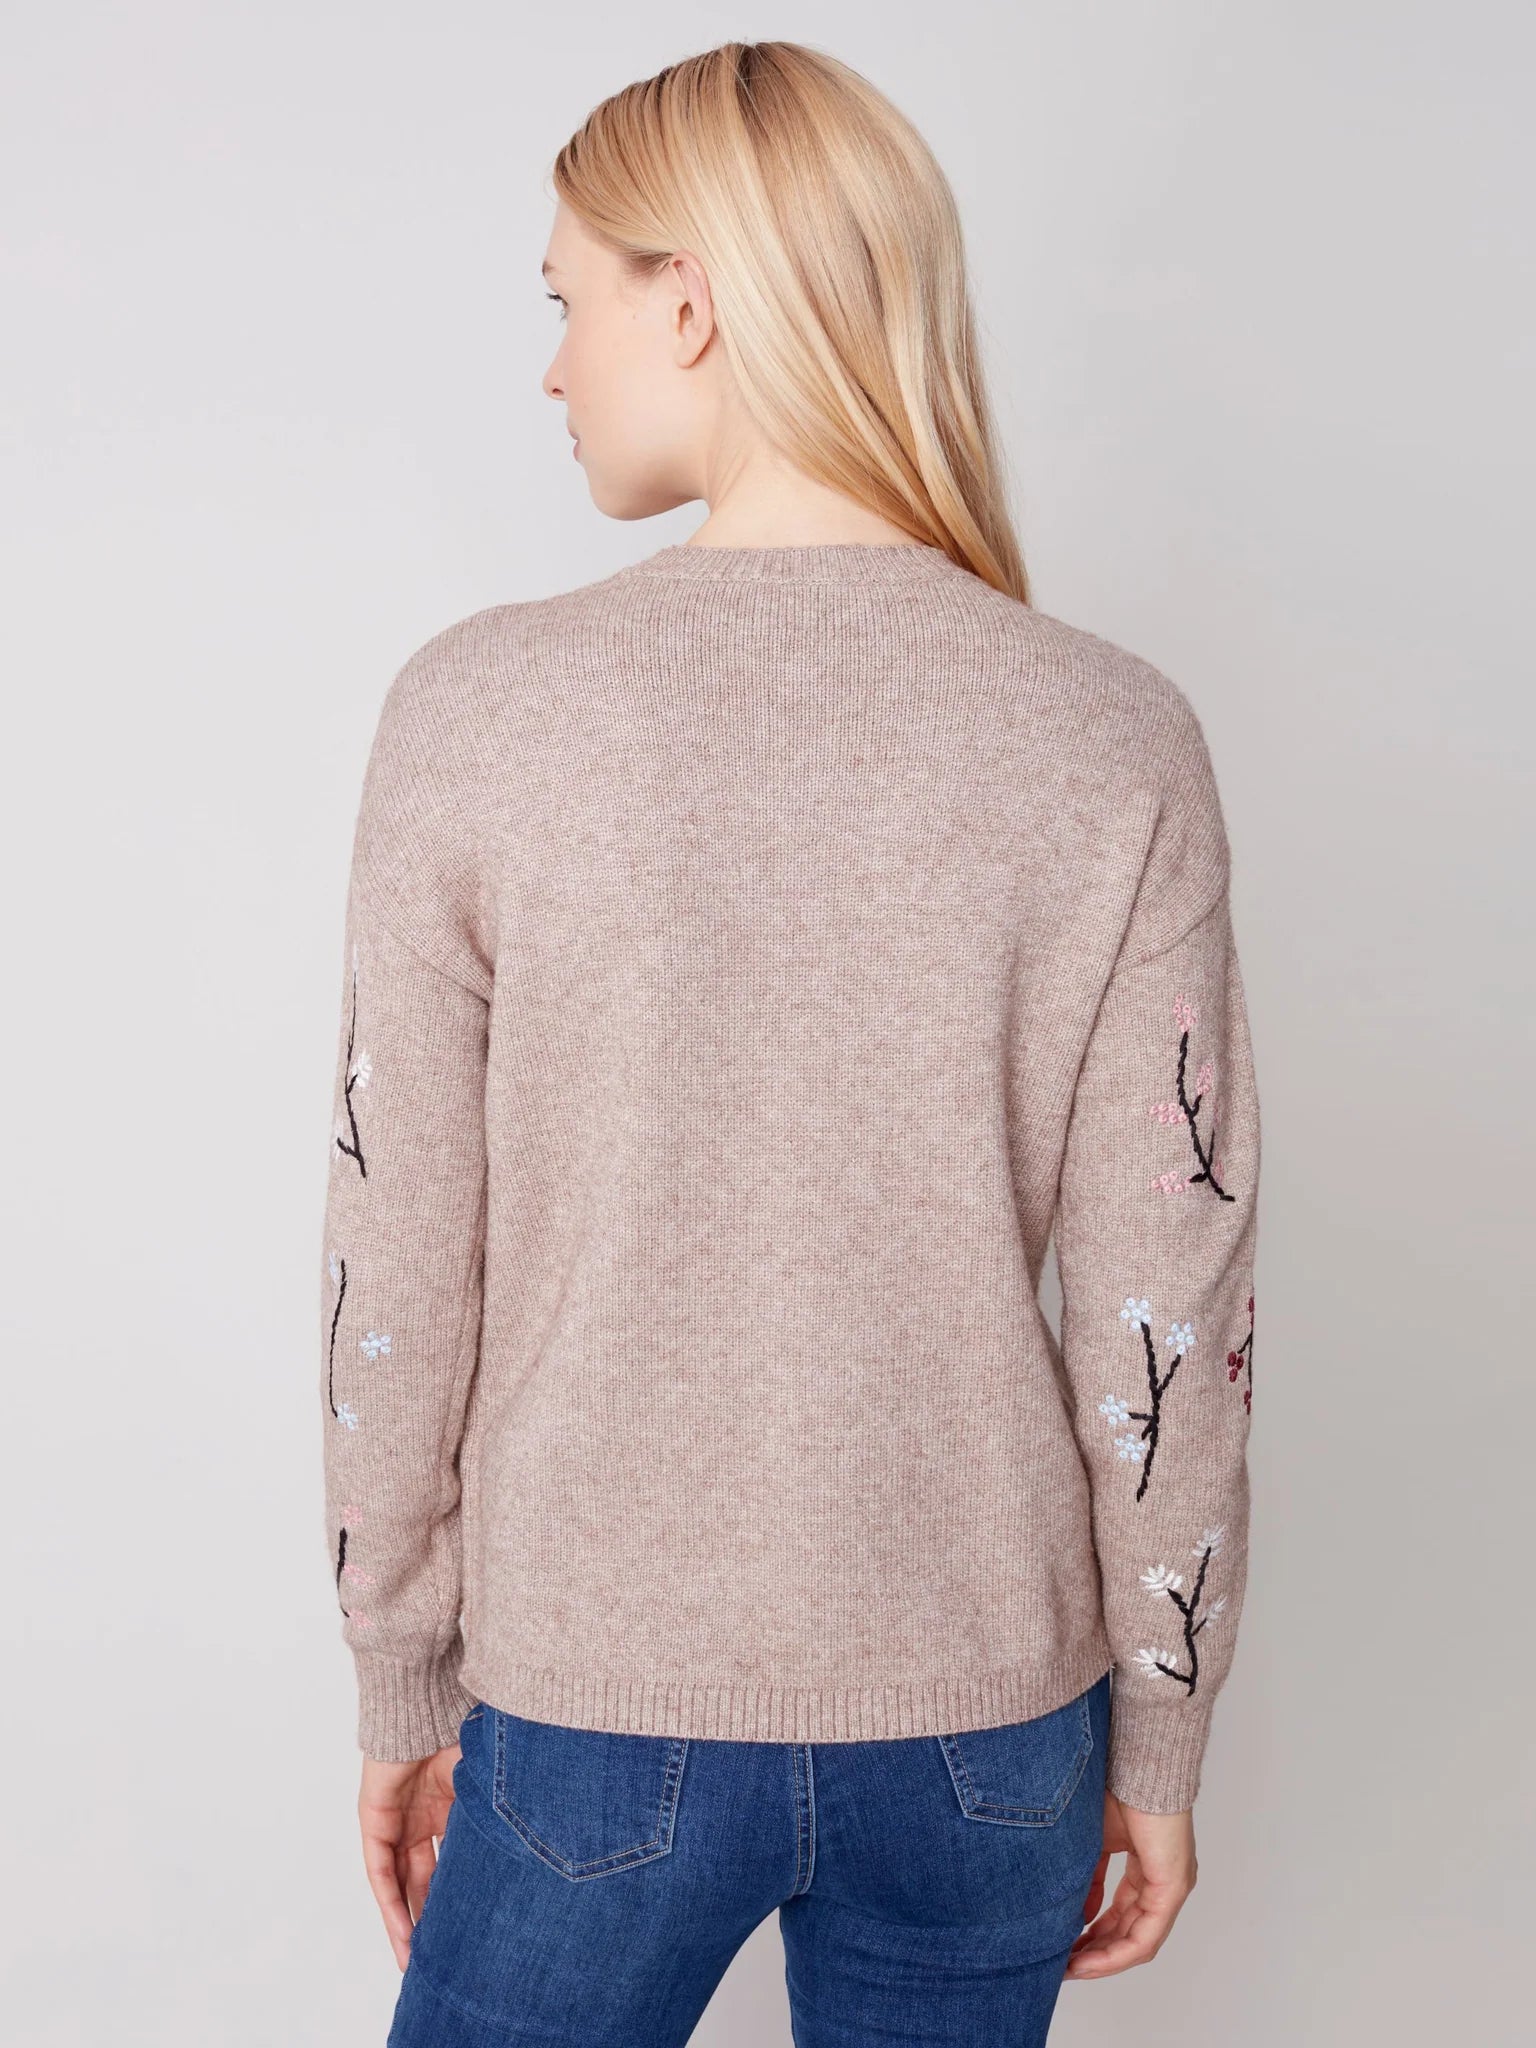 Crew Neck Sweater with Floral Embroidery by Charlie B